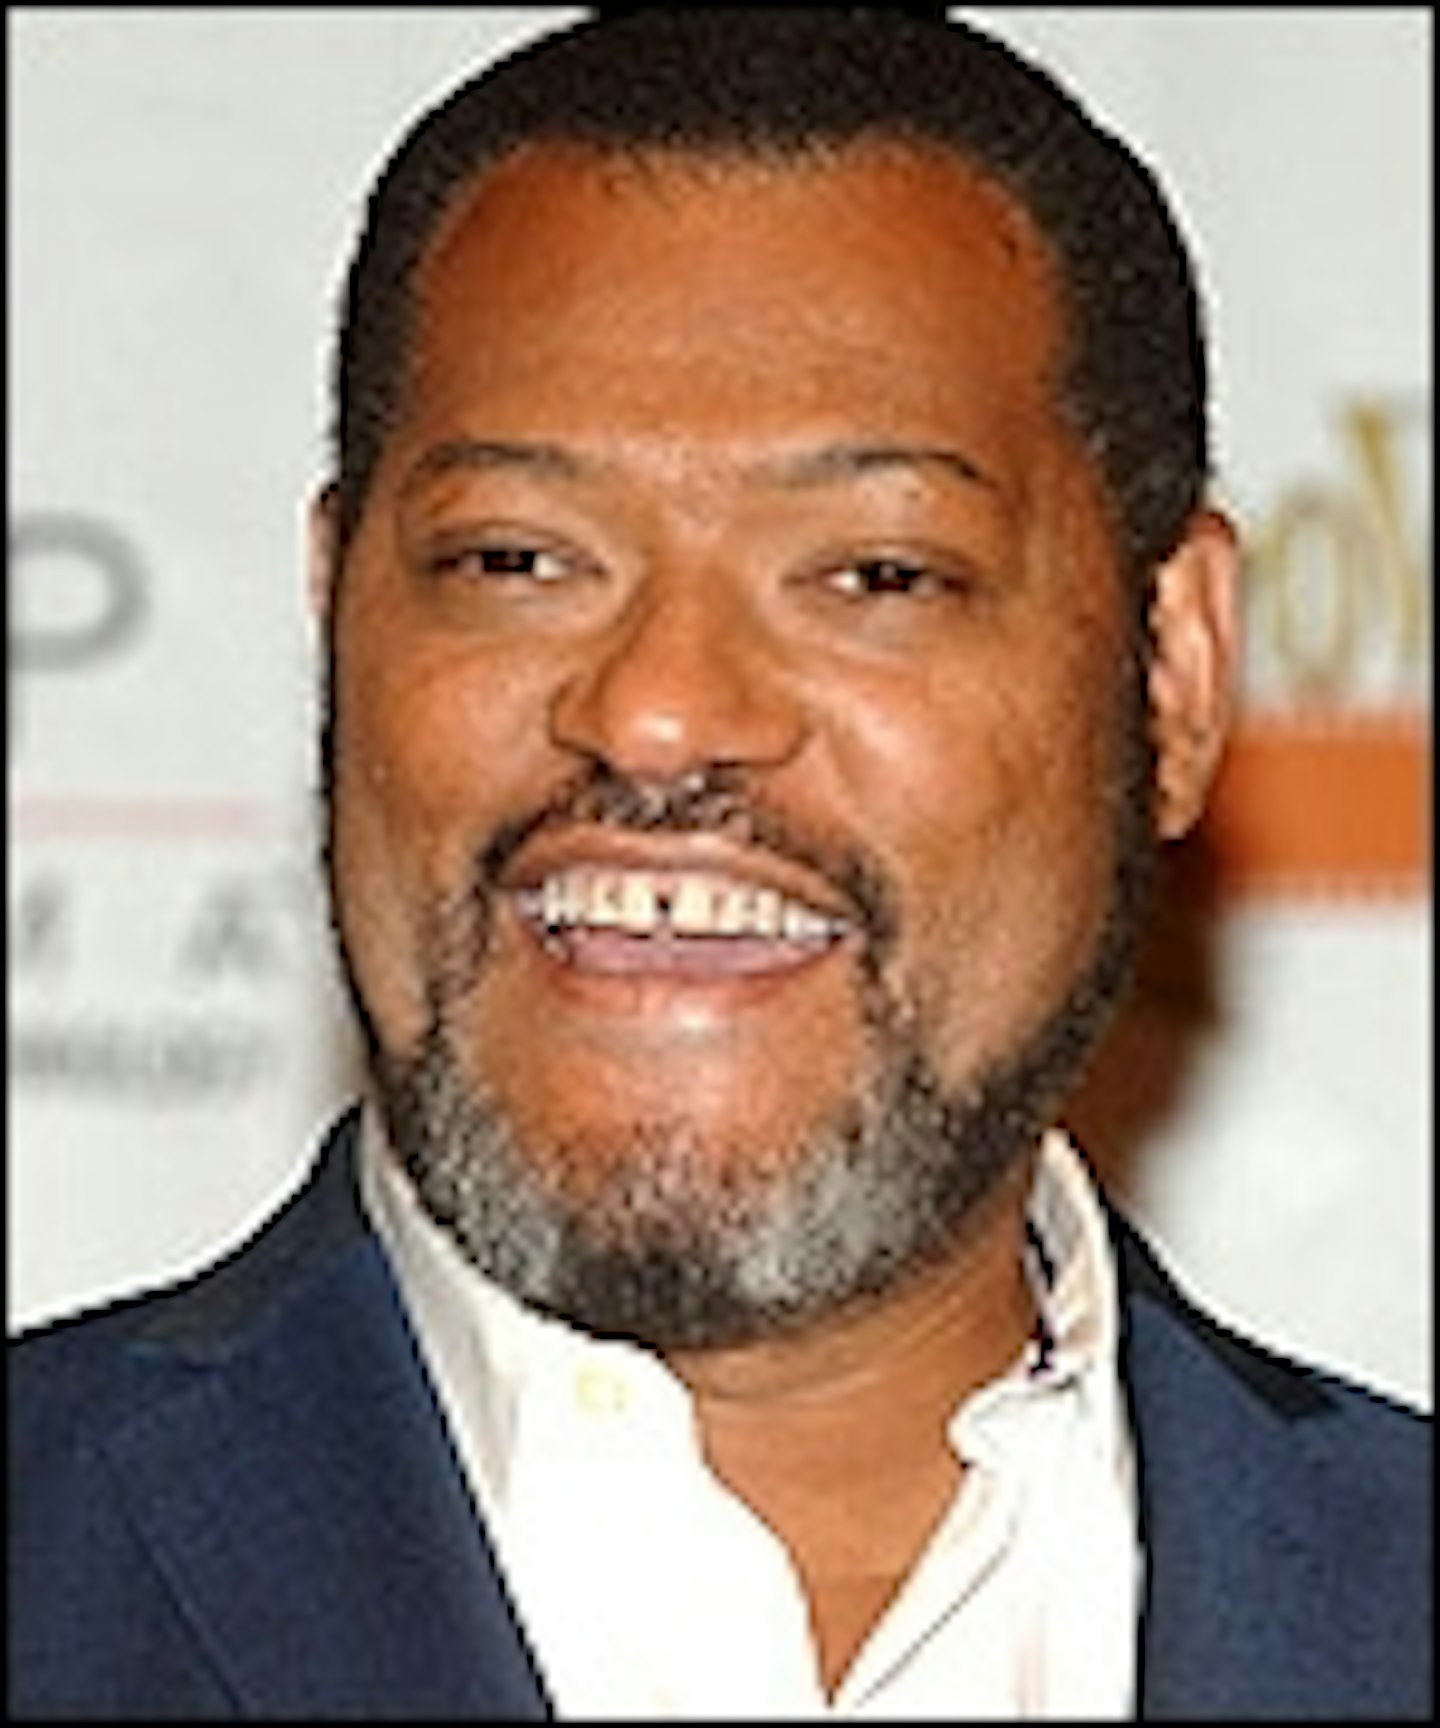 Fishburne Confirmed As Silver Surfer